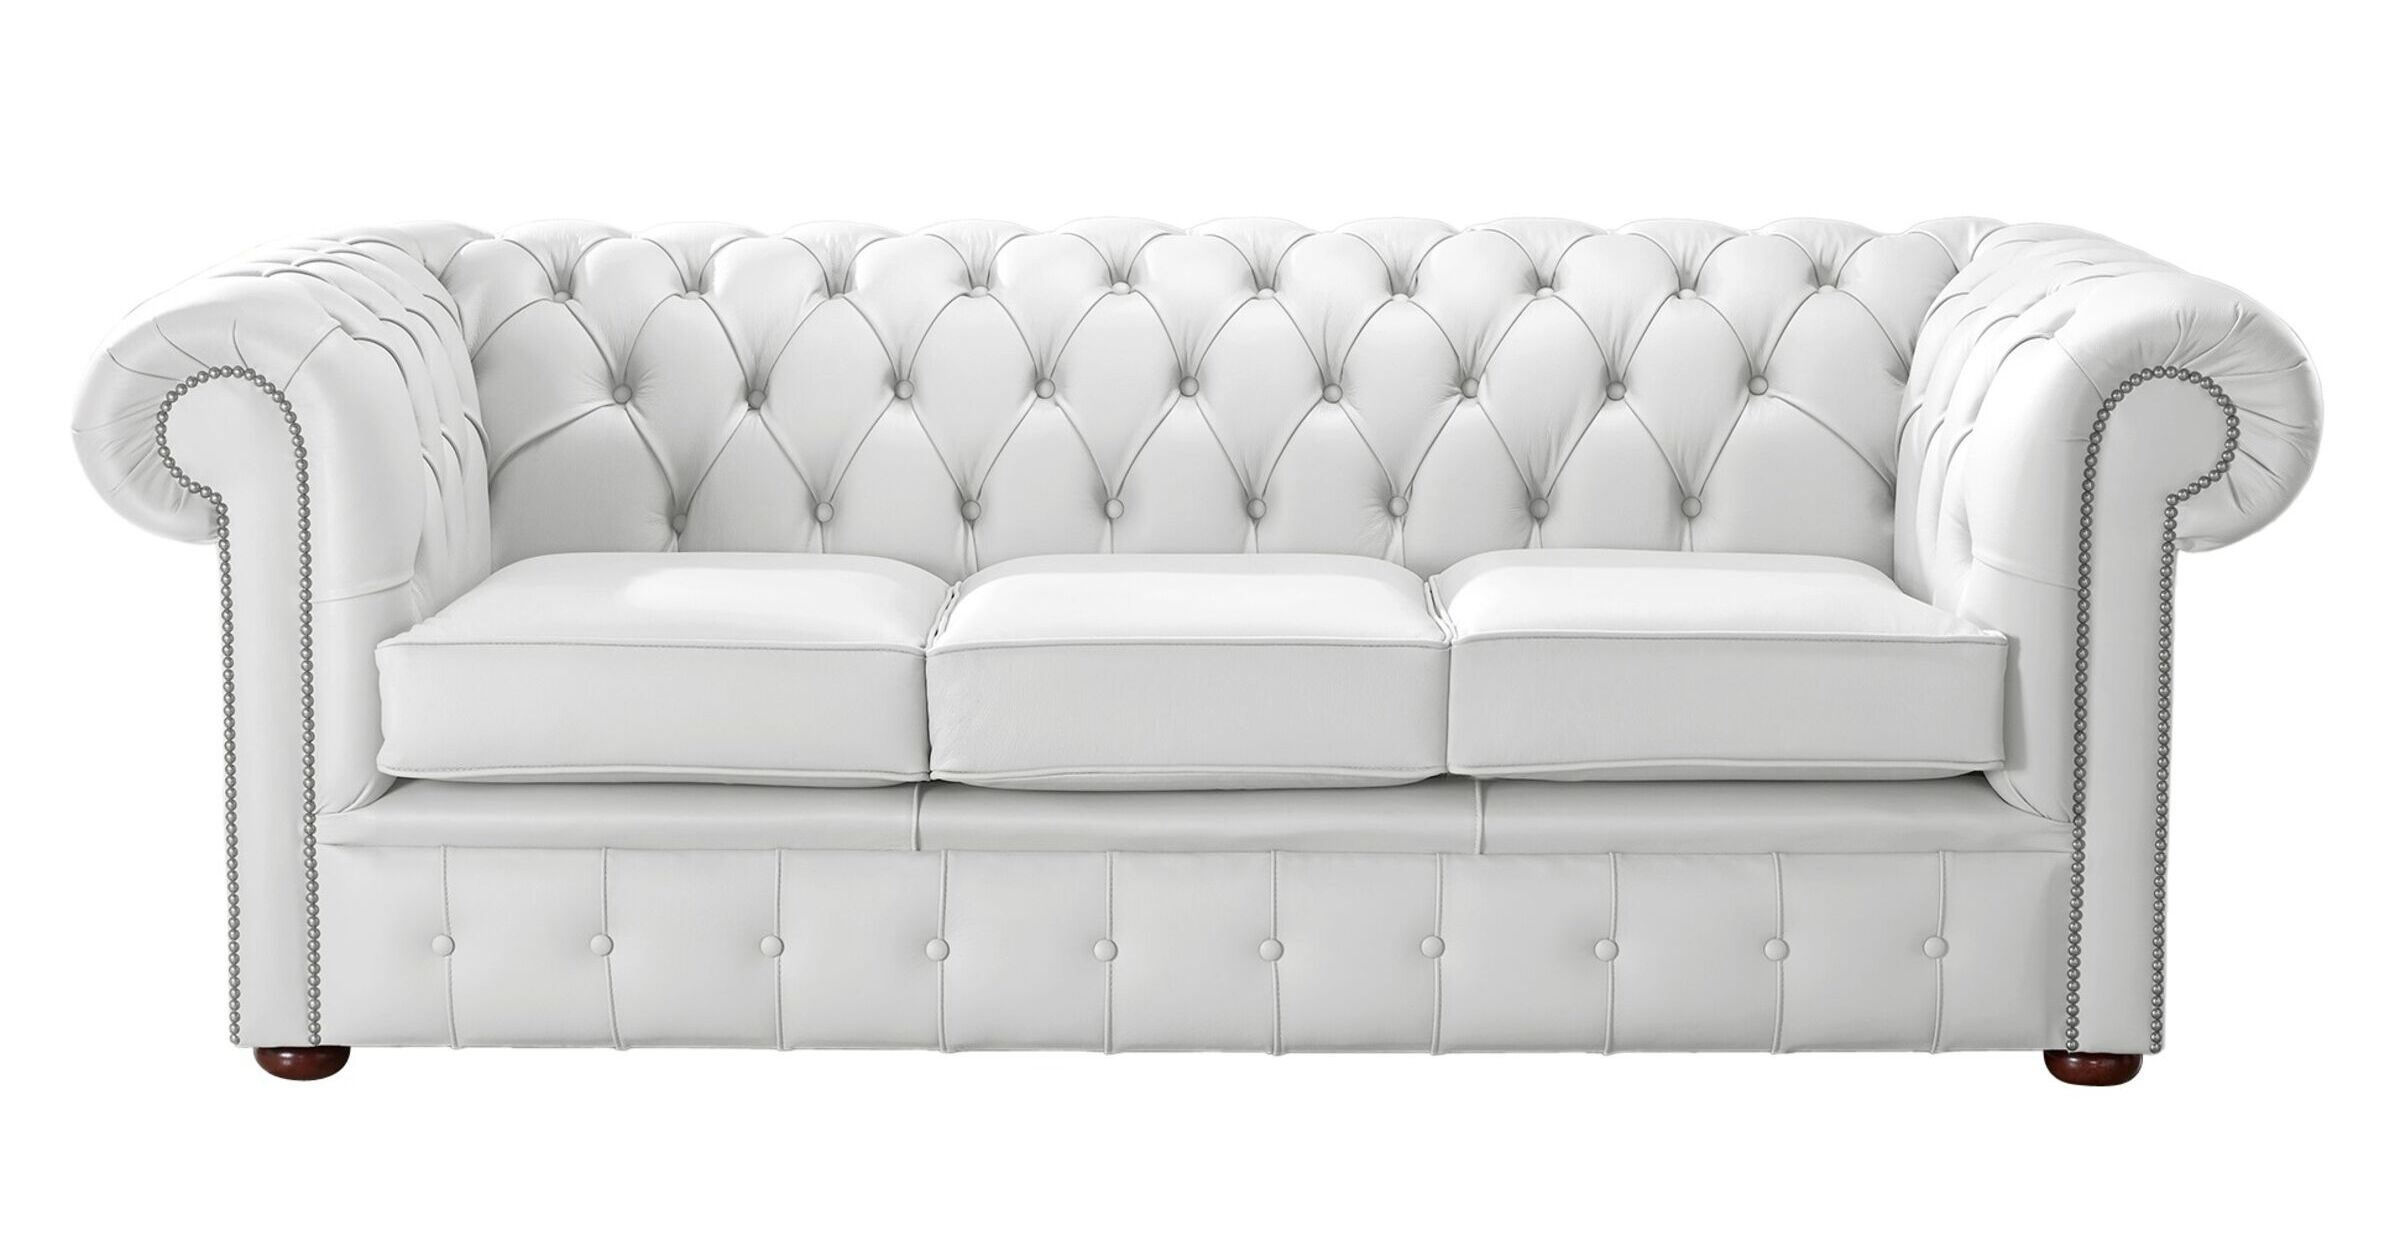 white leather chesterfield sofa bed